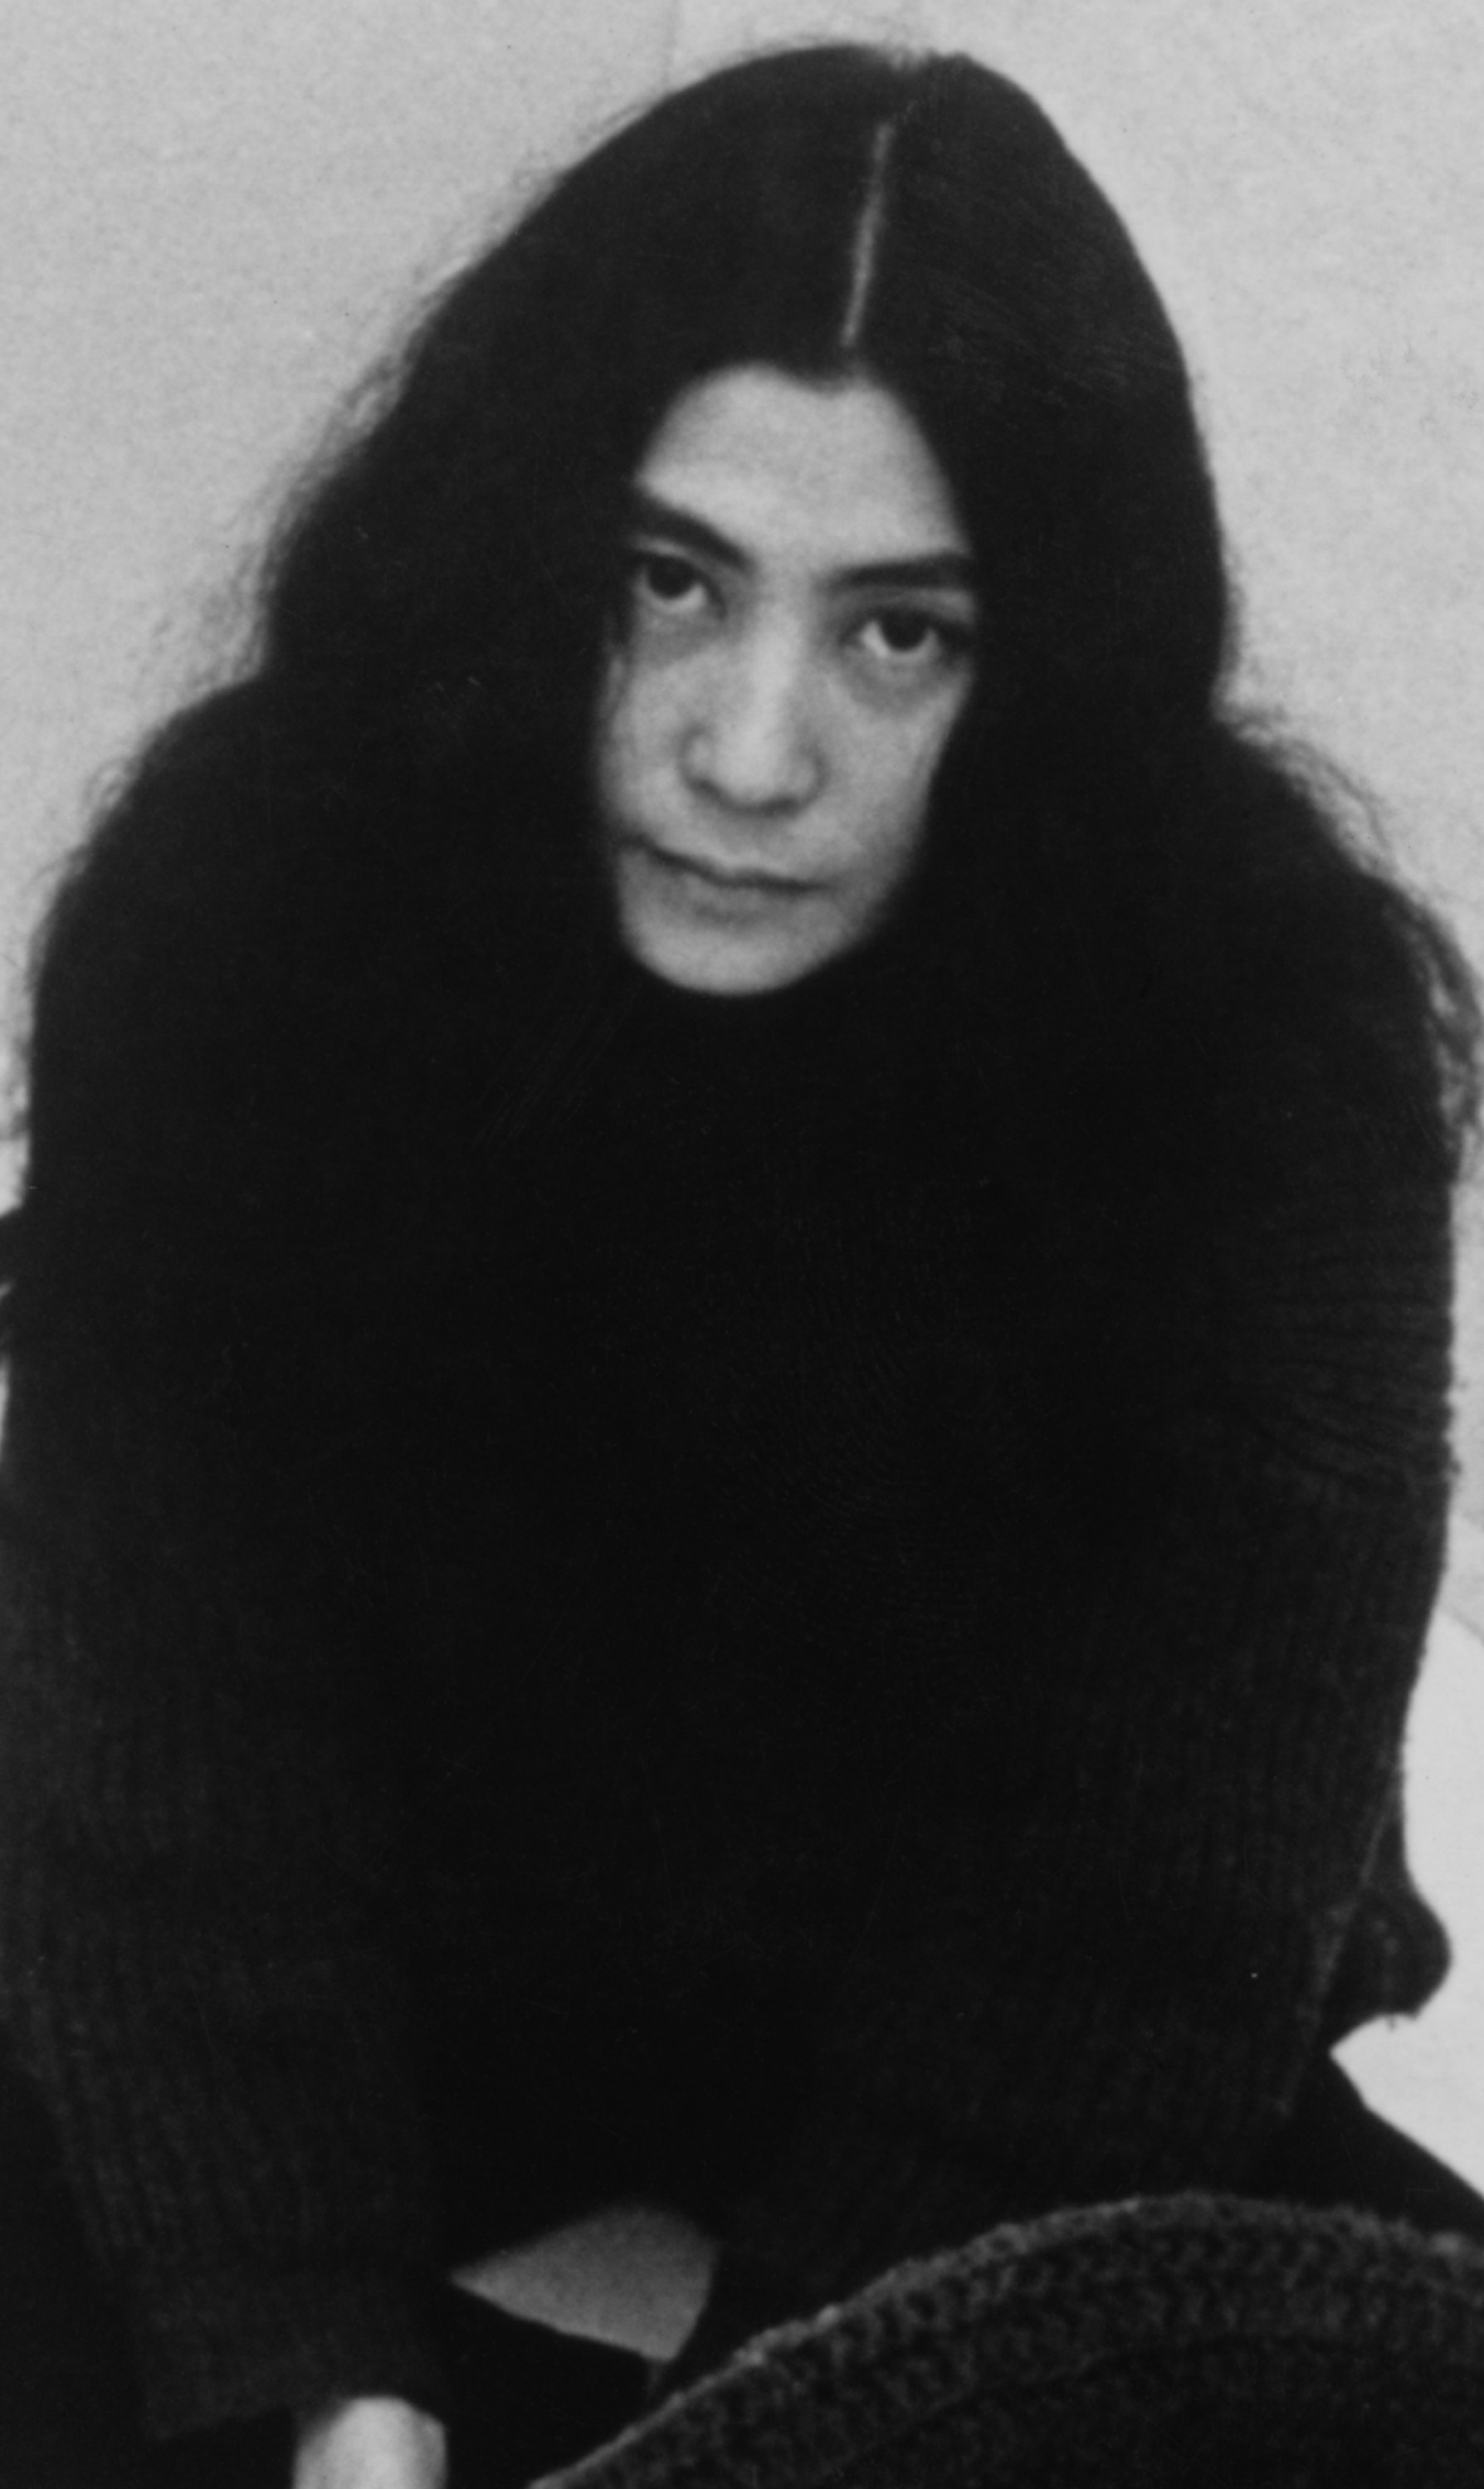 Ono at one of her art exhibits in 1965